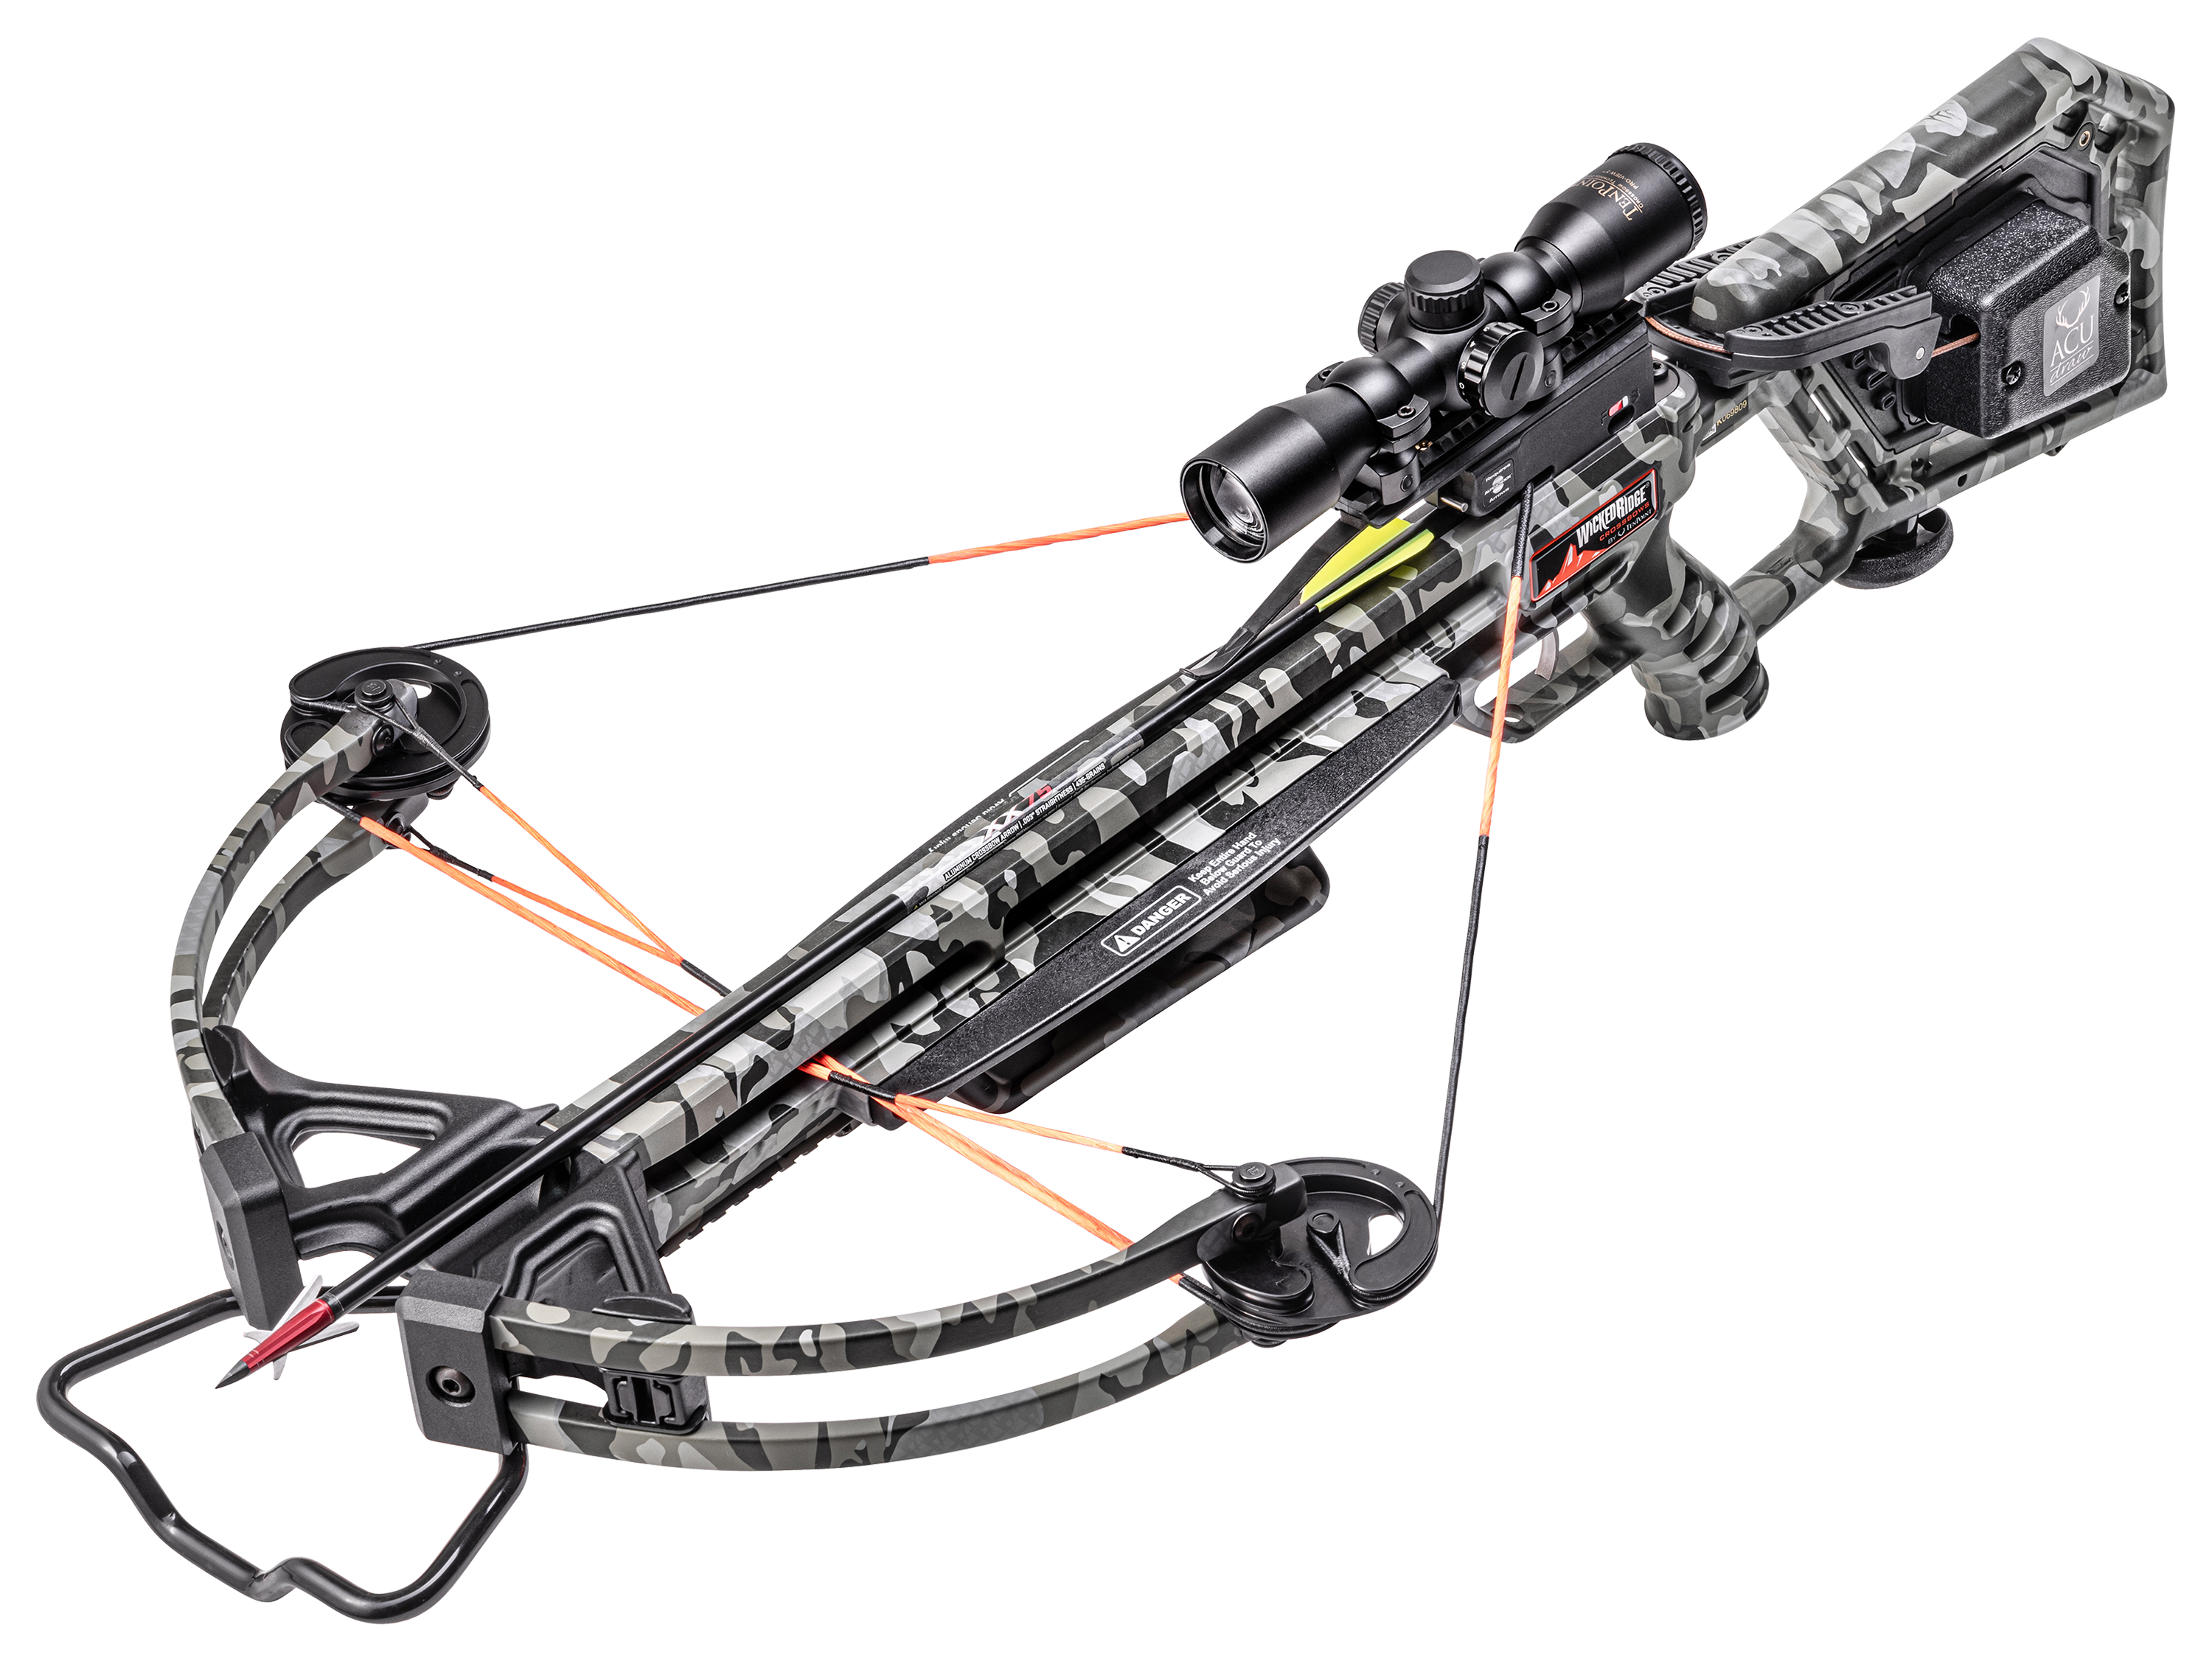 Wicked Ridge Invader 400 Crossbow RTH Package with ACUdraw